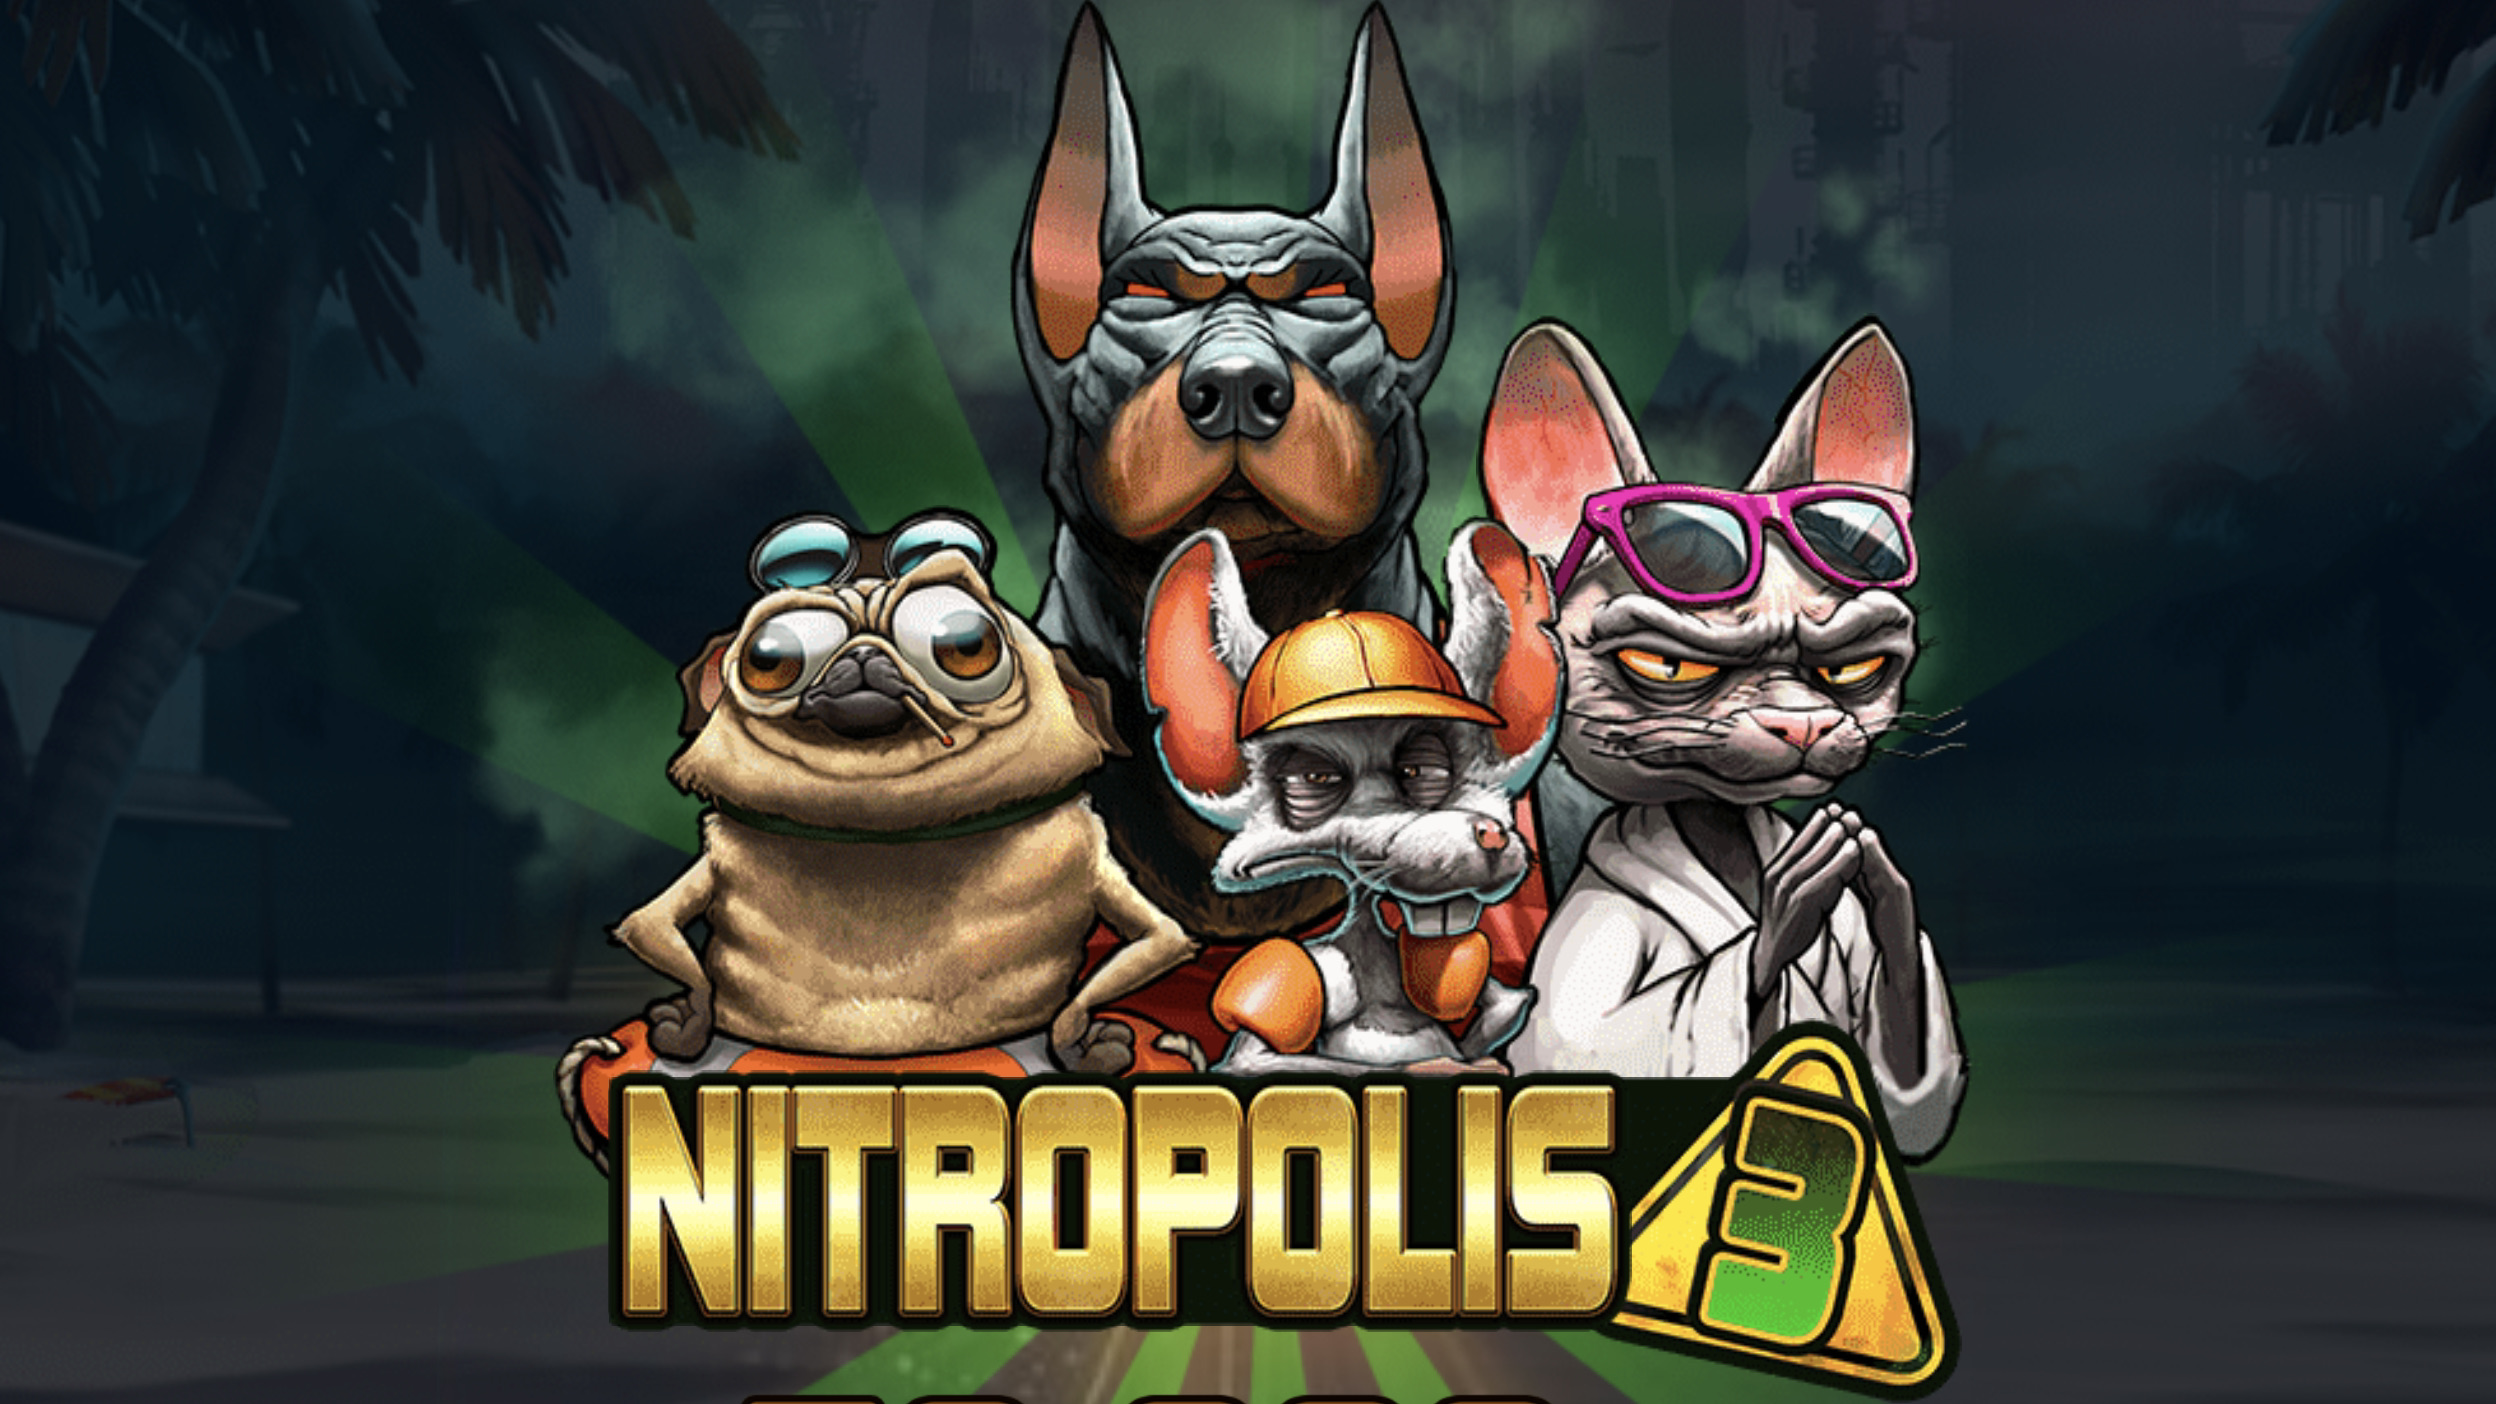 Nitropolis 3 is a 4x3, 4,096-payline video slot that incorporates a maximum win potential of up to x50,000 the bet. 